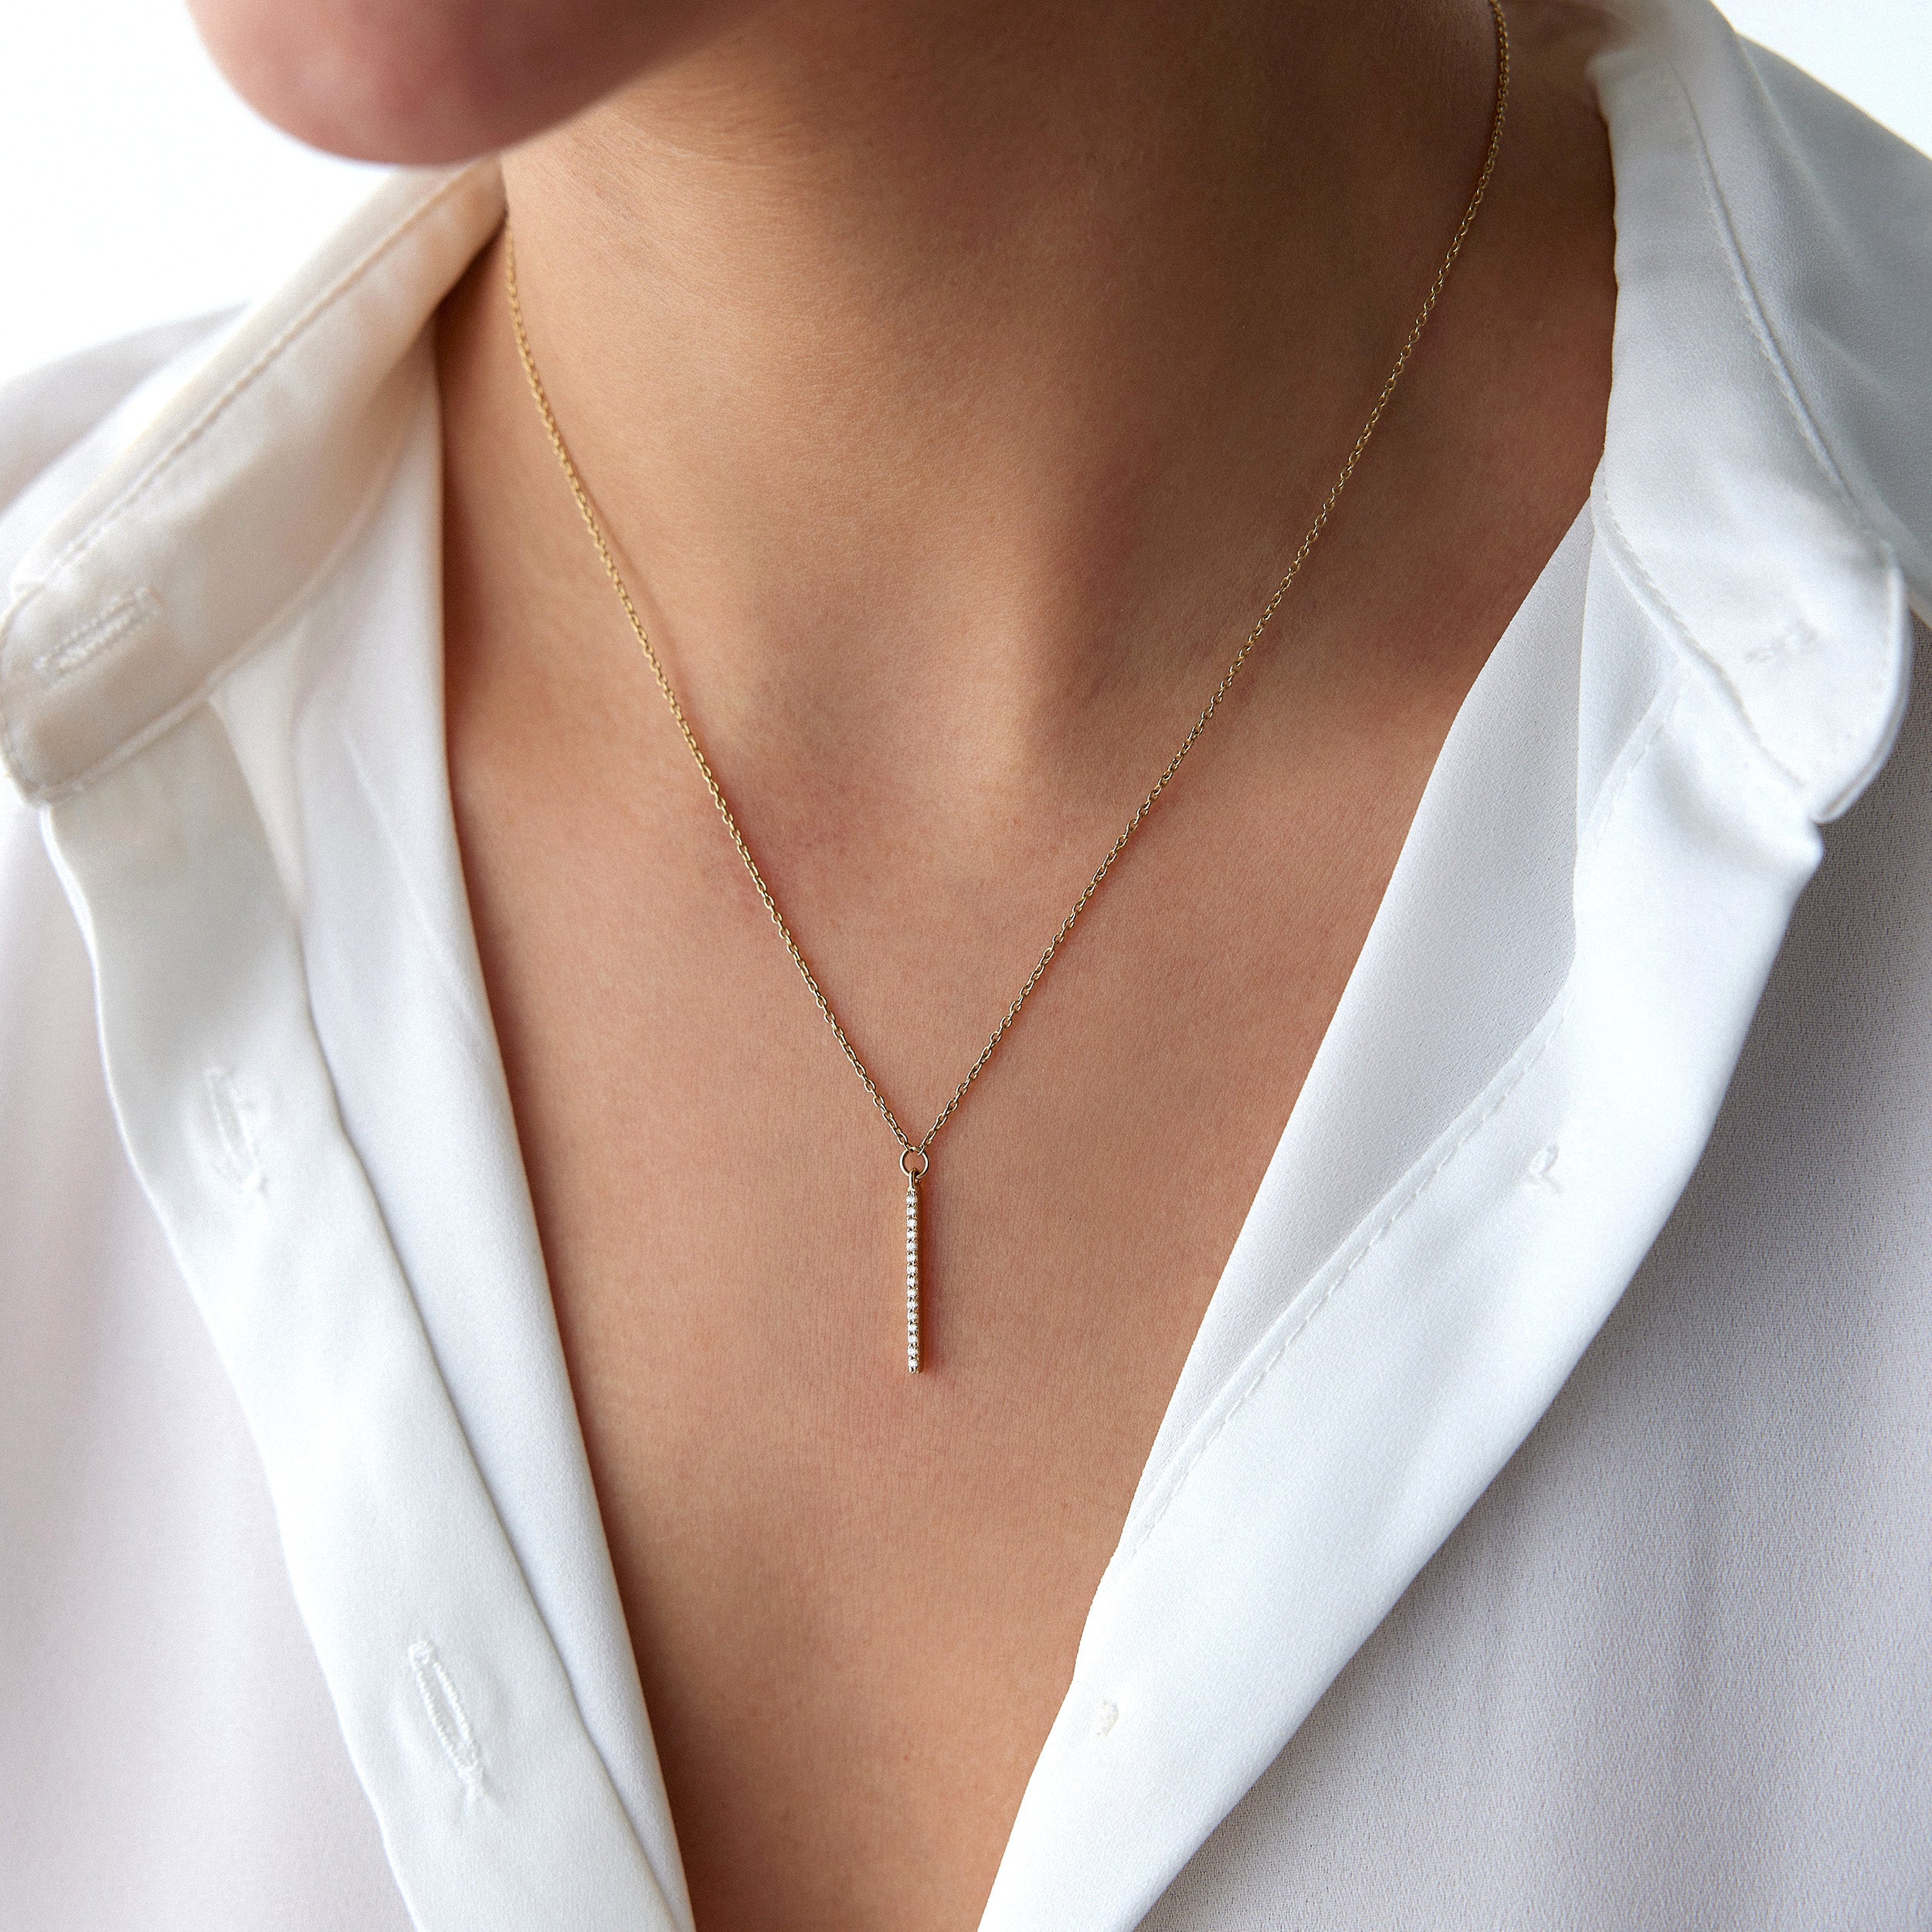 Diamond Vertical Bar Necklace Available in 14K and 18K Gold